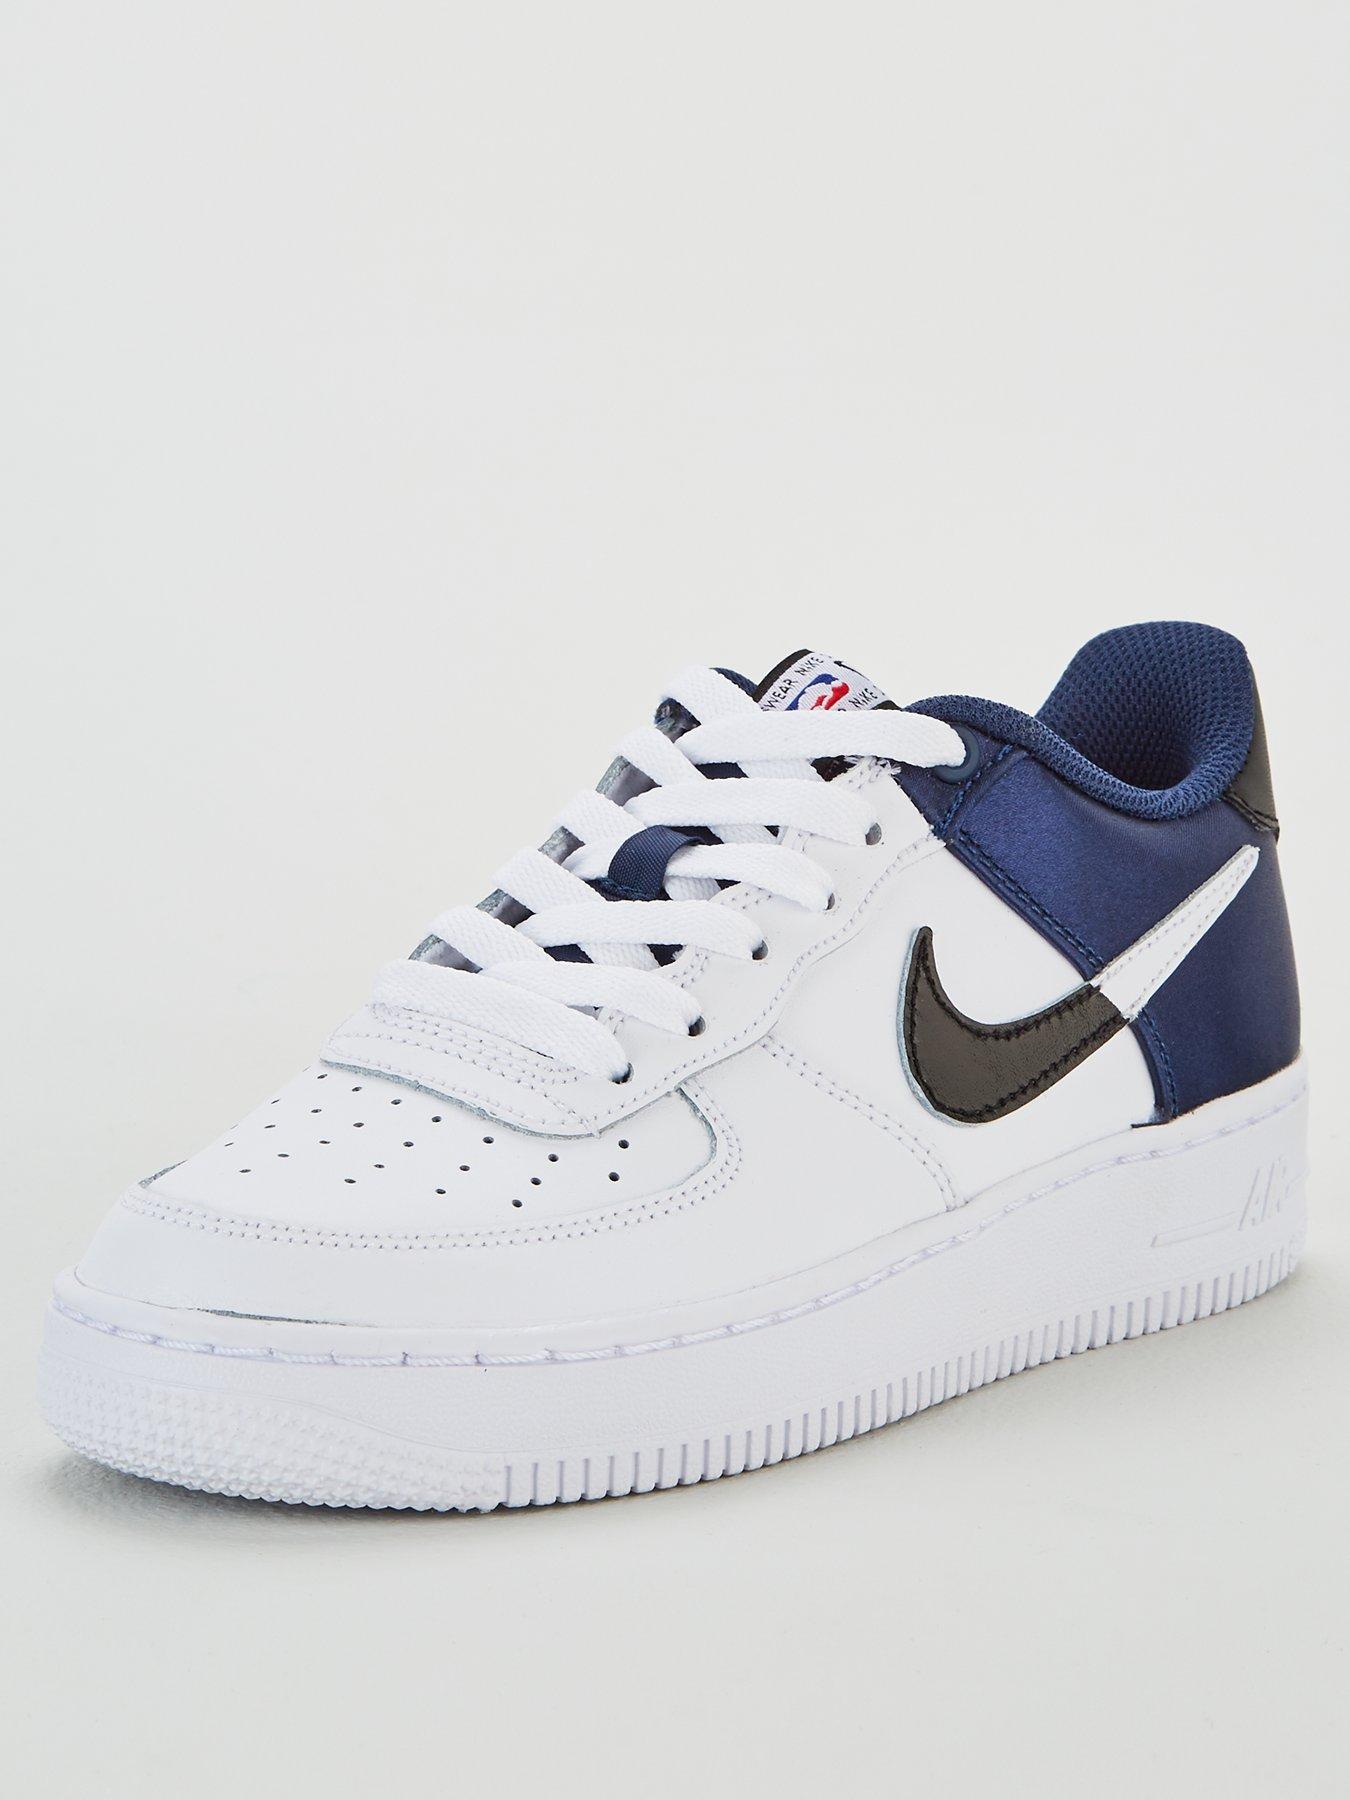 nike air force 1 size 5.5 junior